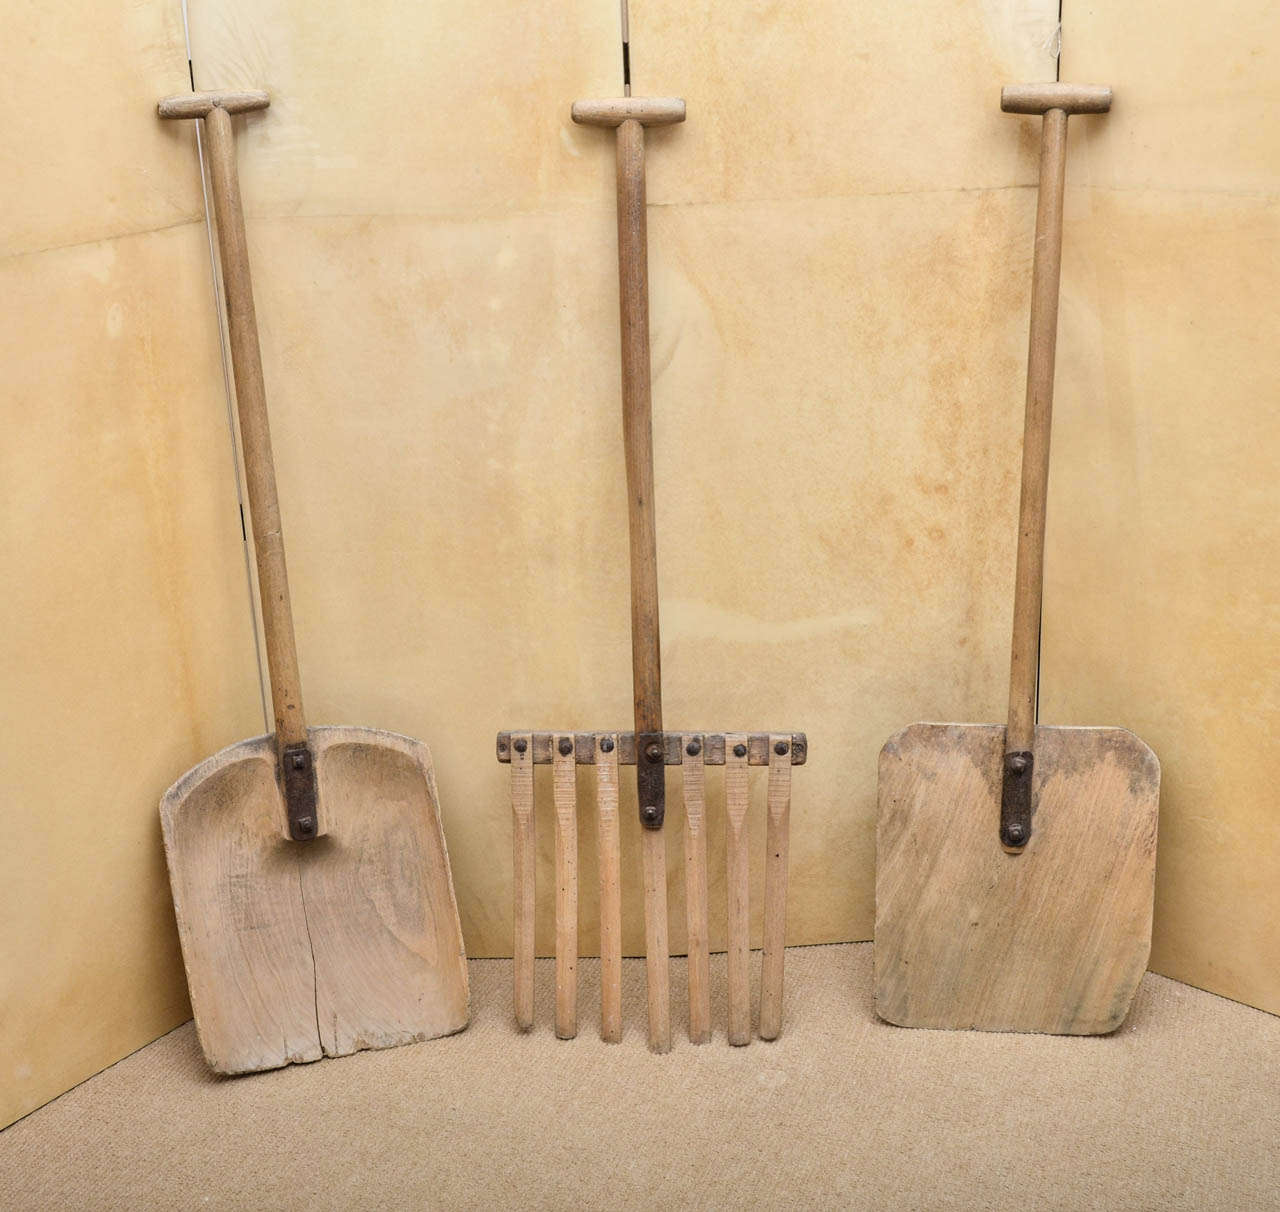 A set of three 19th Century brewery tools used for turning hops made from ashwood and sycamore.